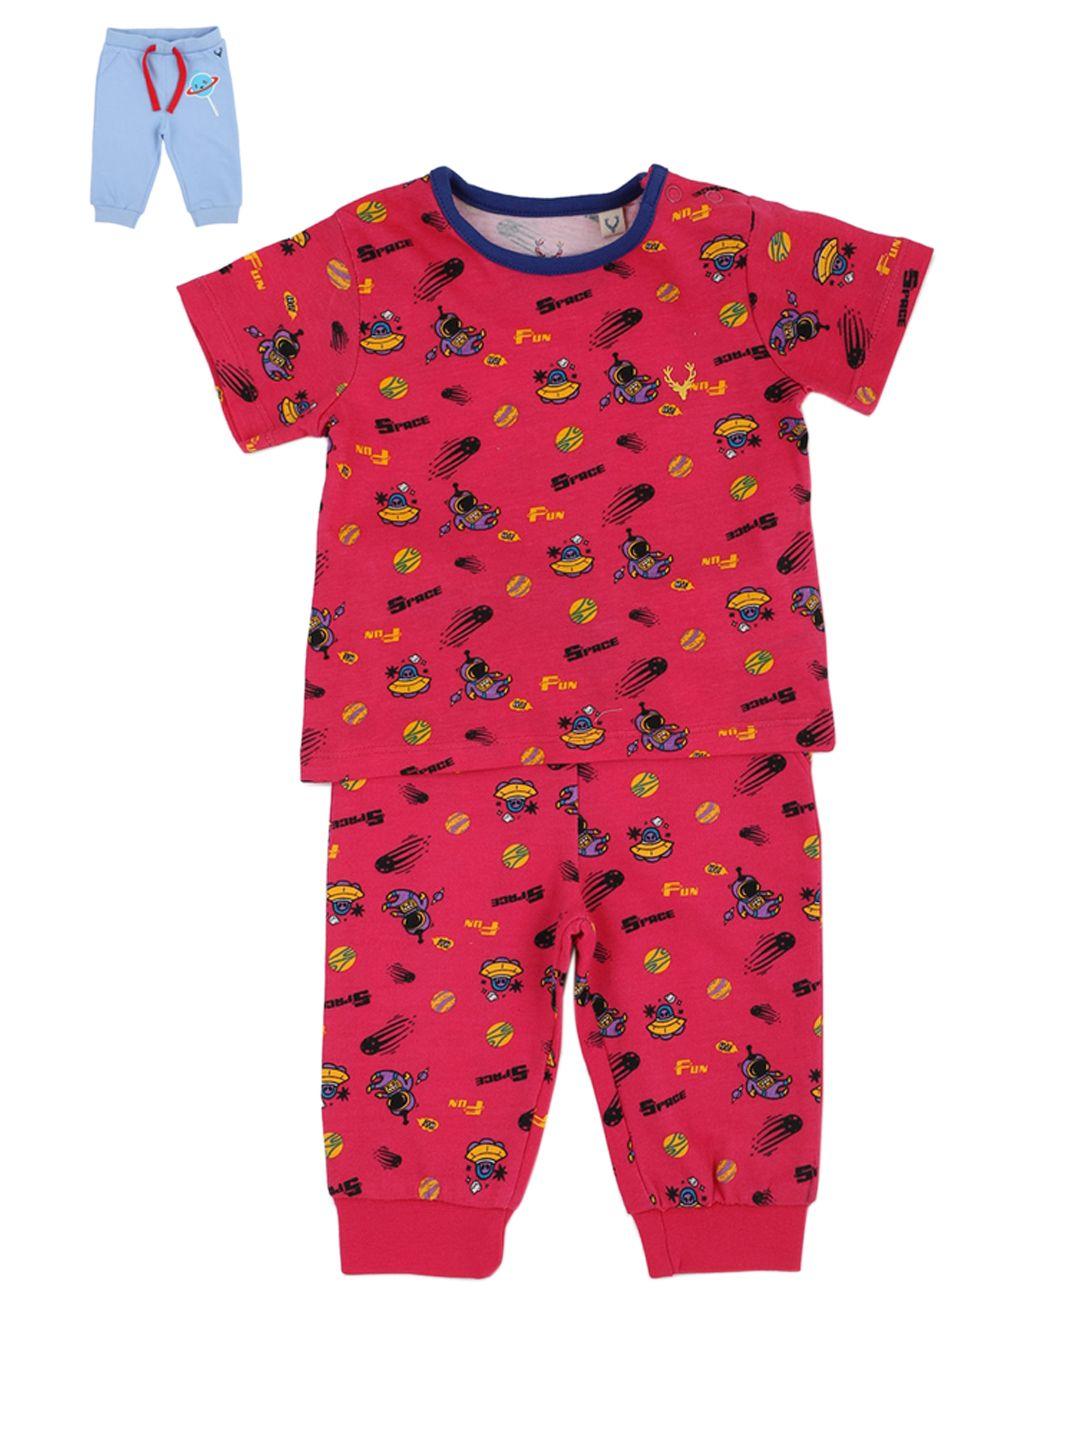 allen-solly-junior-boys-red-&-blue-printed-cotton-t-shirt-with-two-joggers